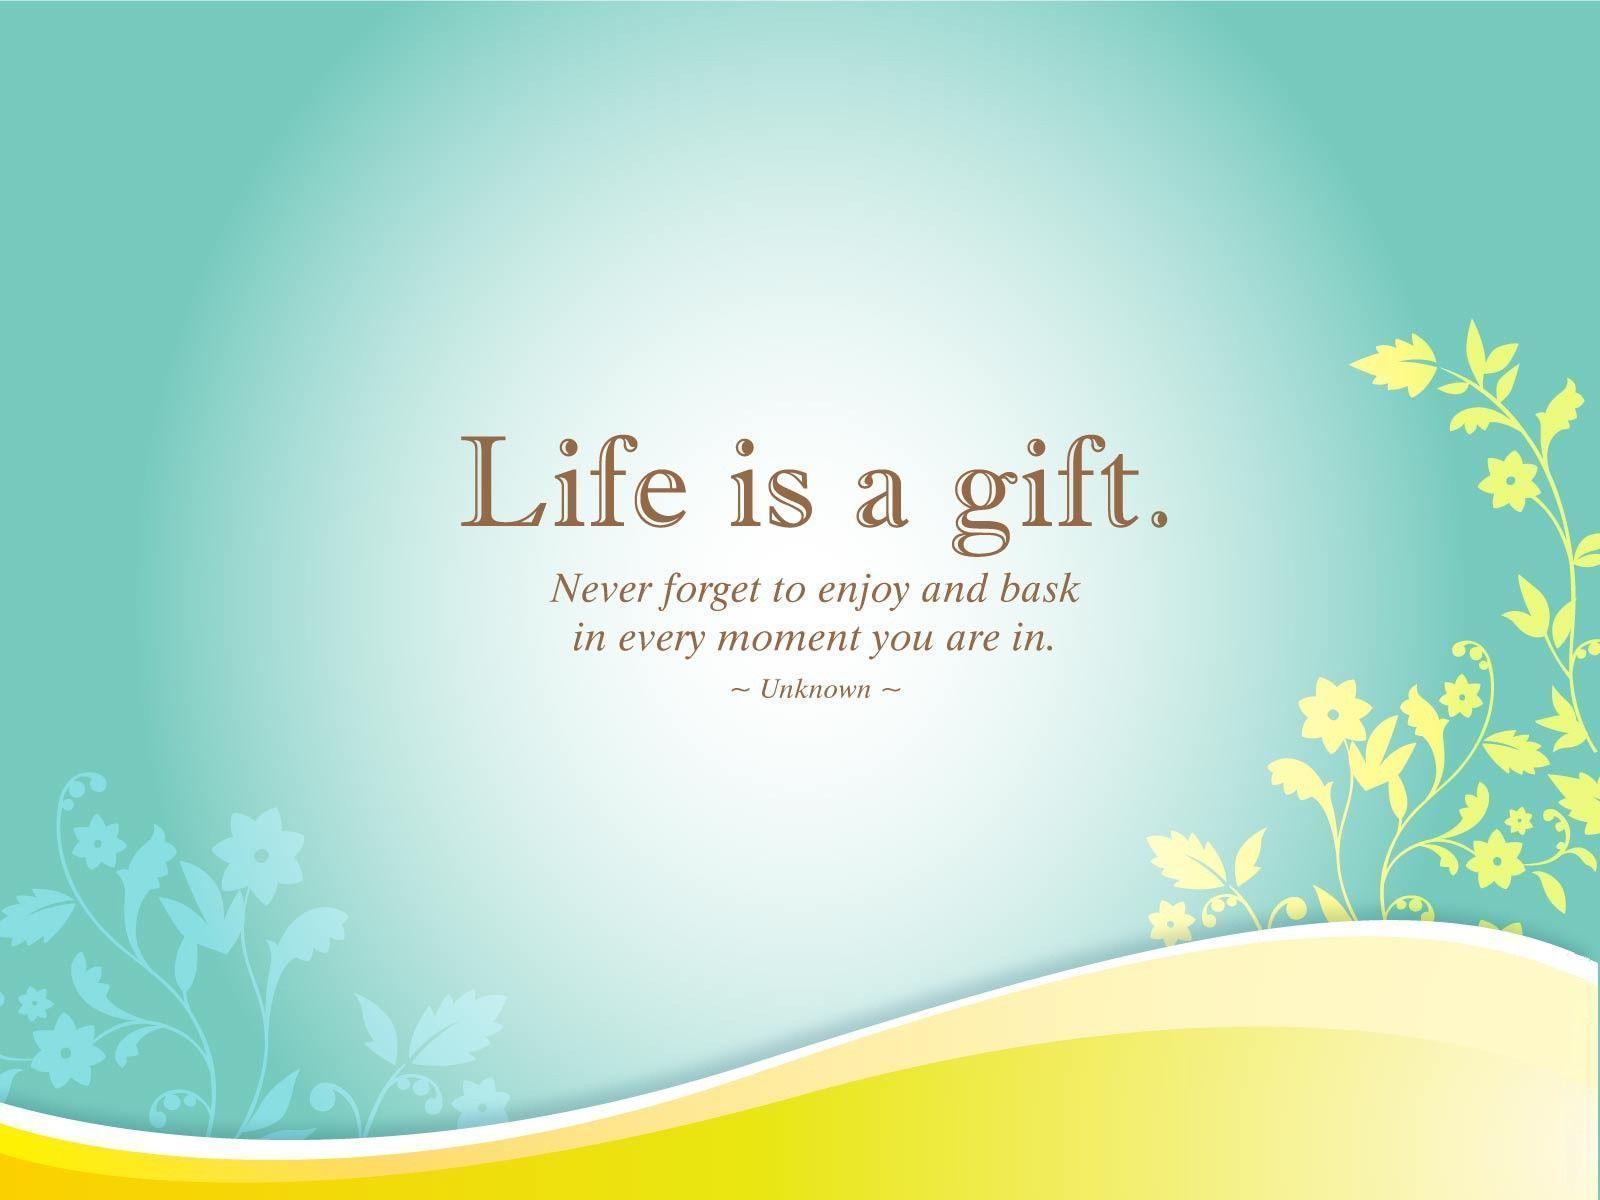 HD Wallpaper 201. Life is a Gift Motivational Thought Wallpaper